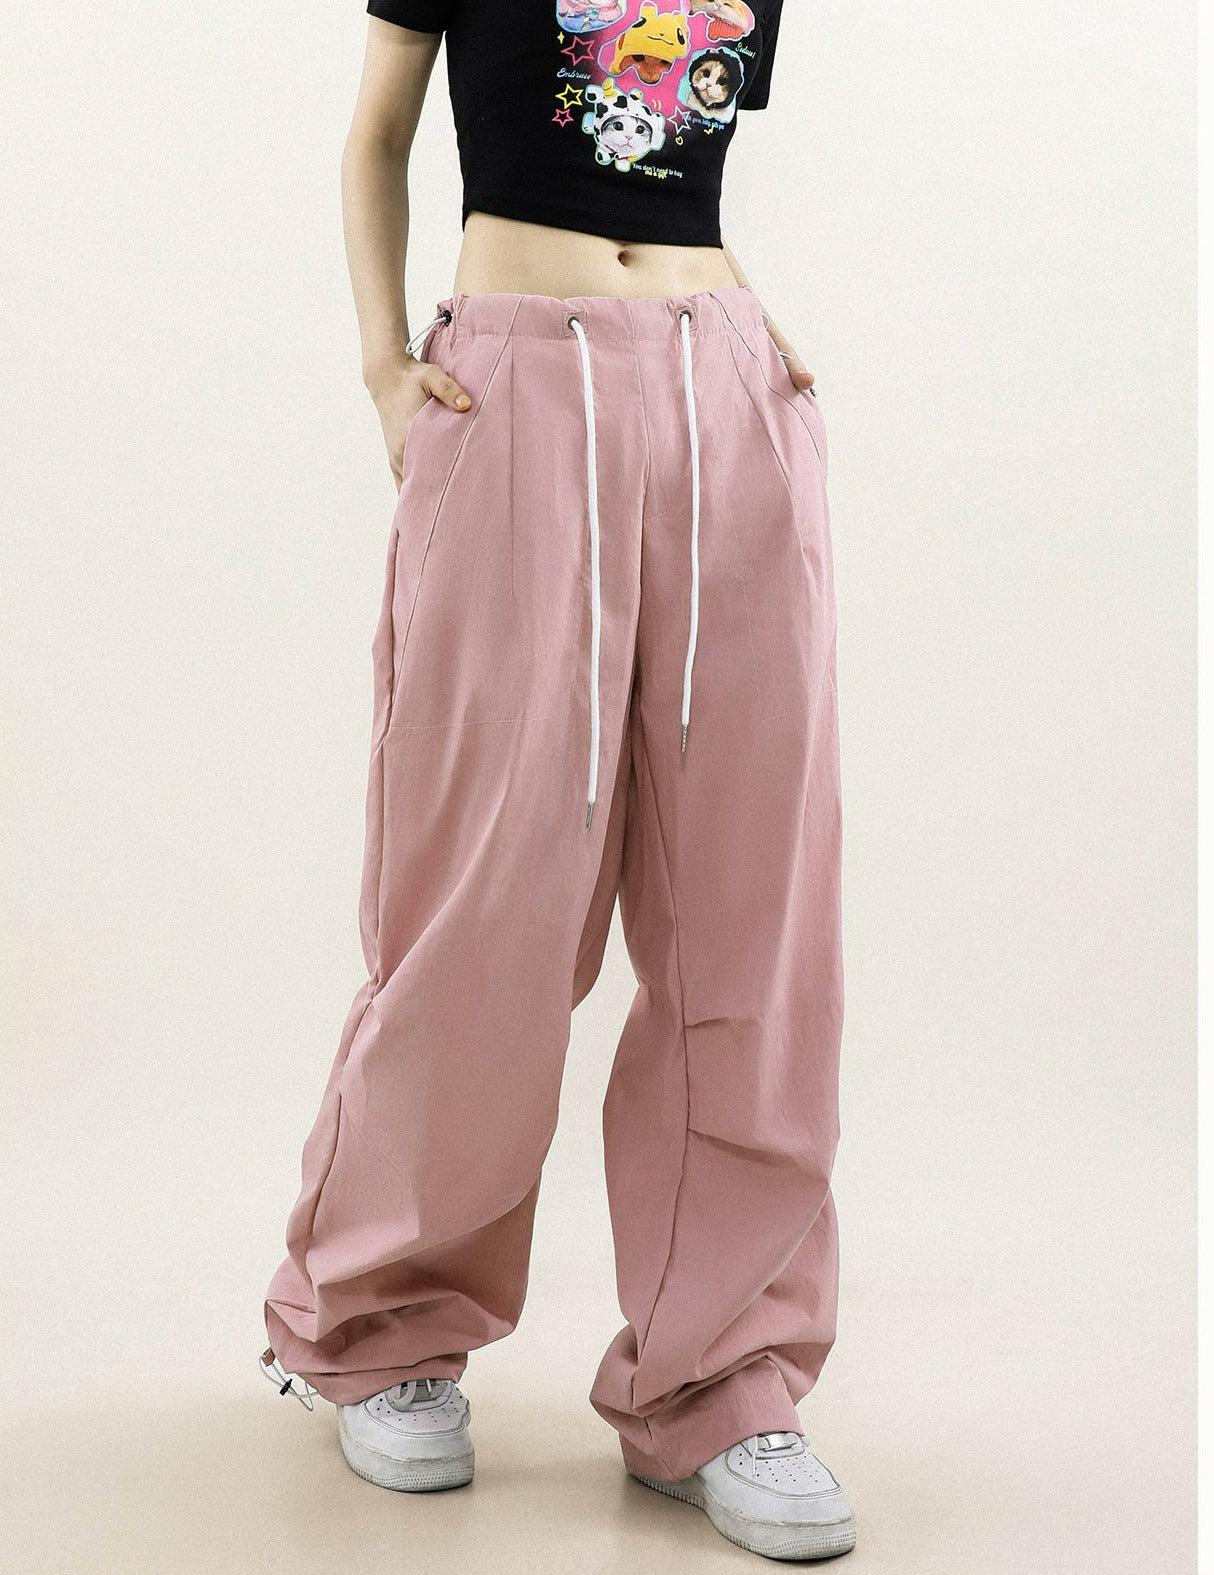 Knee Pleated Drawstring Pants Korean Street Fashion Pants By Mr Nearly Shop Online at OH Vault